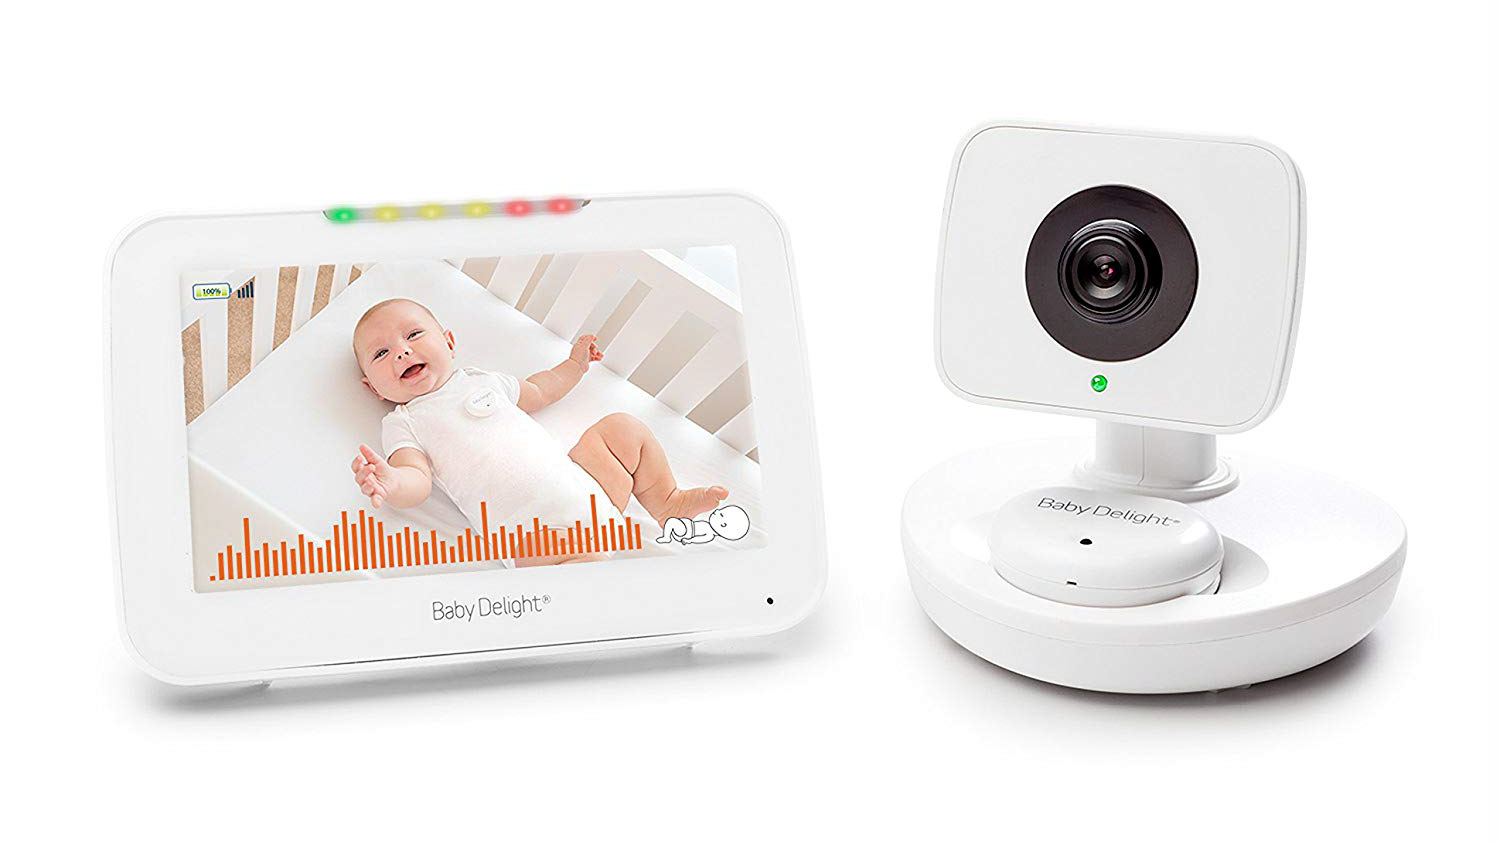 Baby Delight monitor. Image: Baby Delight.